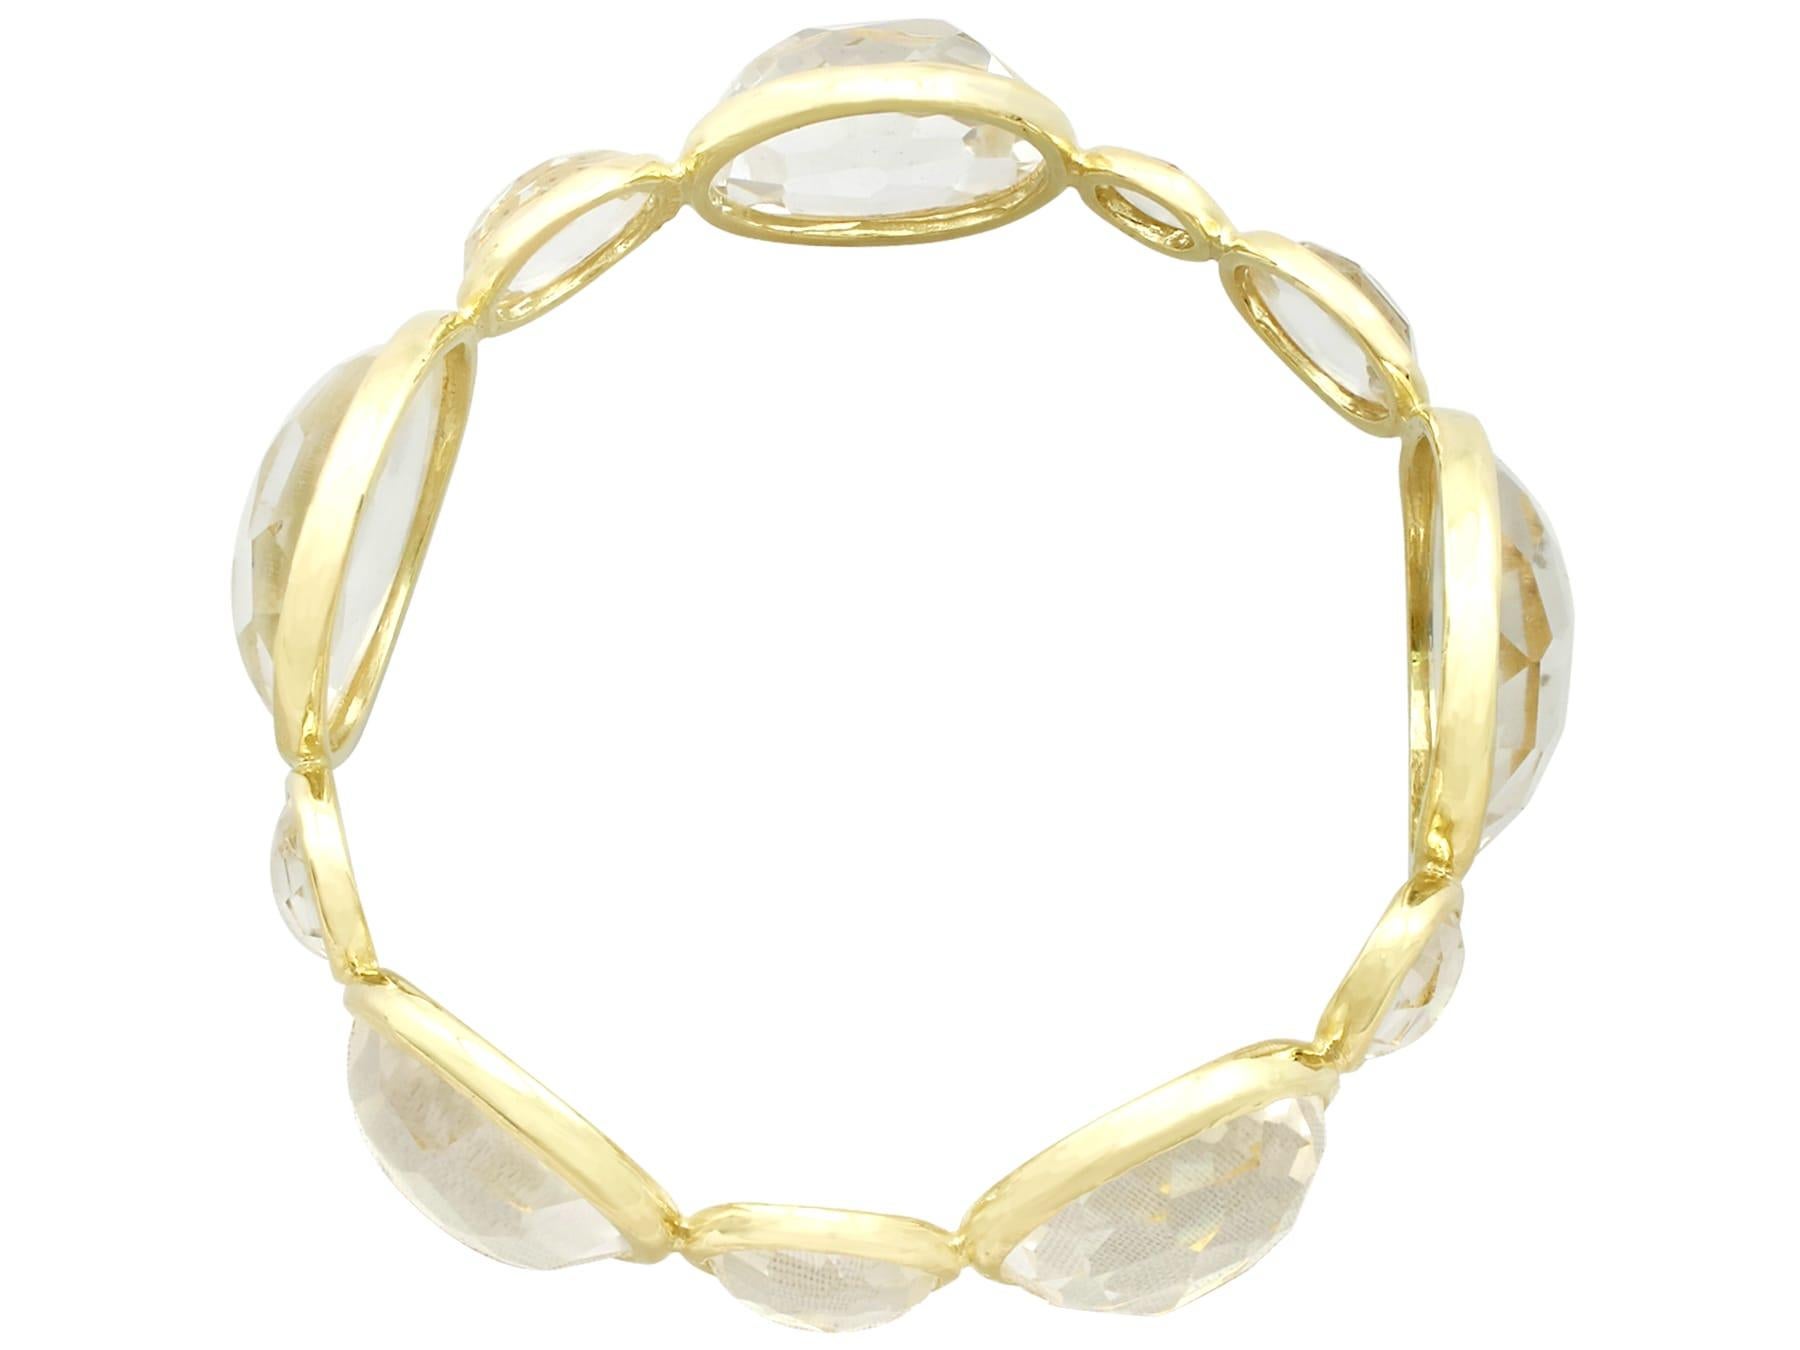 An impressive rock crystal and 18k yellow gold bangle by Ippolita; part of our diverse gemstone jewelry and estate jewelry collections.

This fine and impressive rock crystal bangle has been crafted in 18k yellow gold.

The substantial bangle is